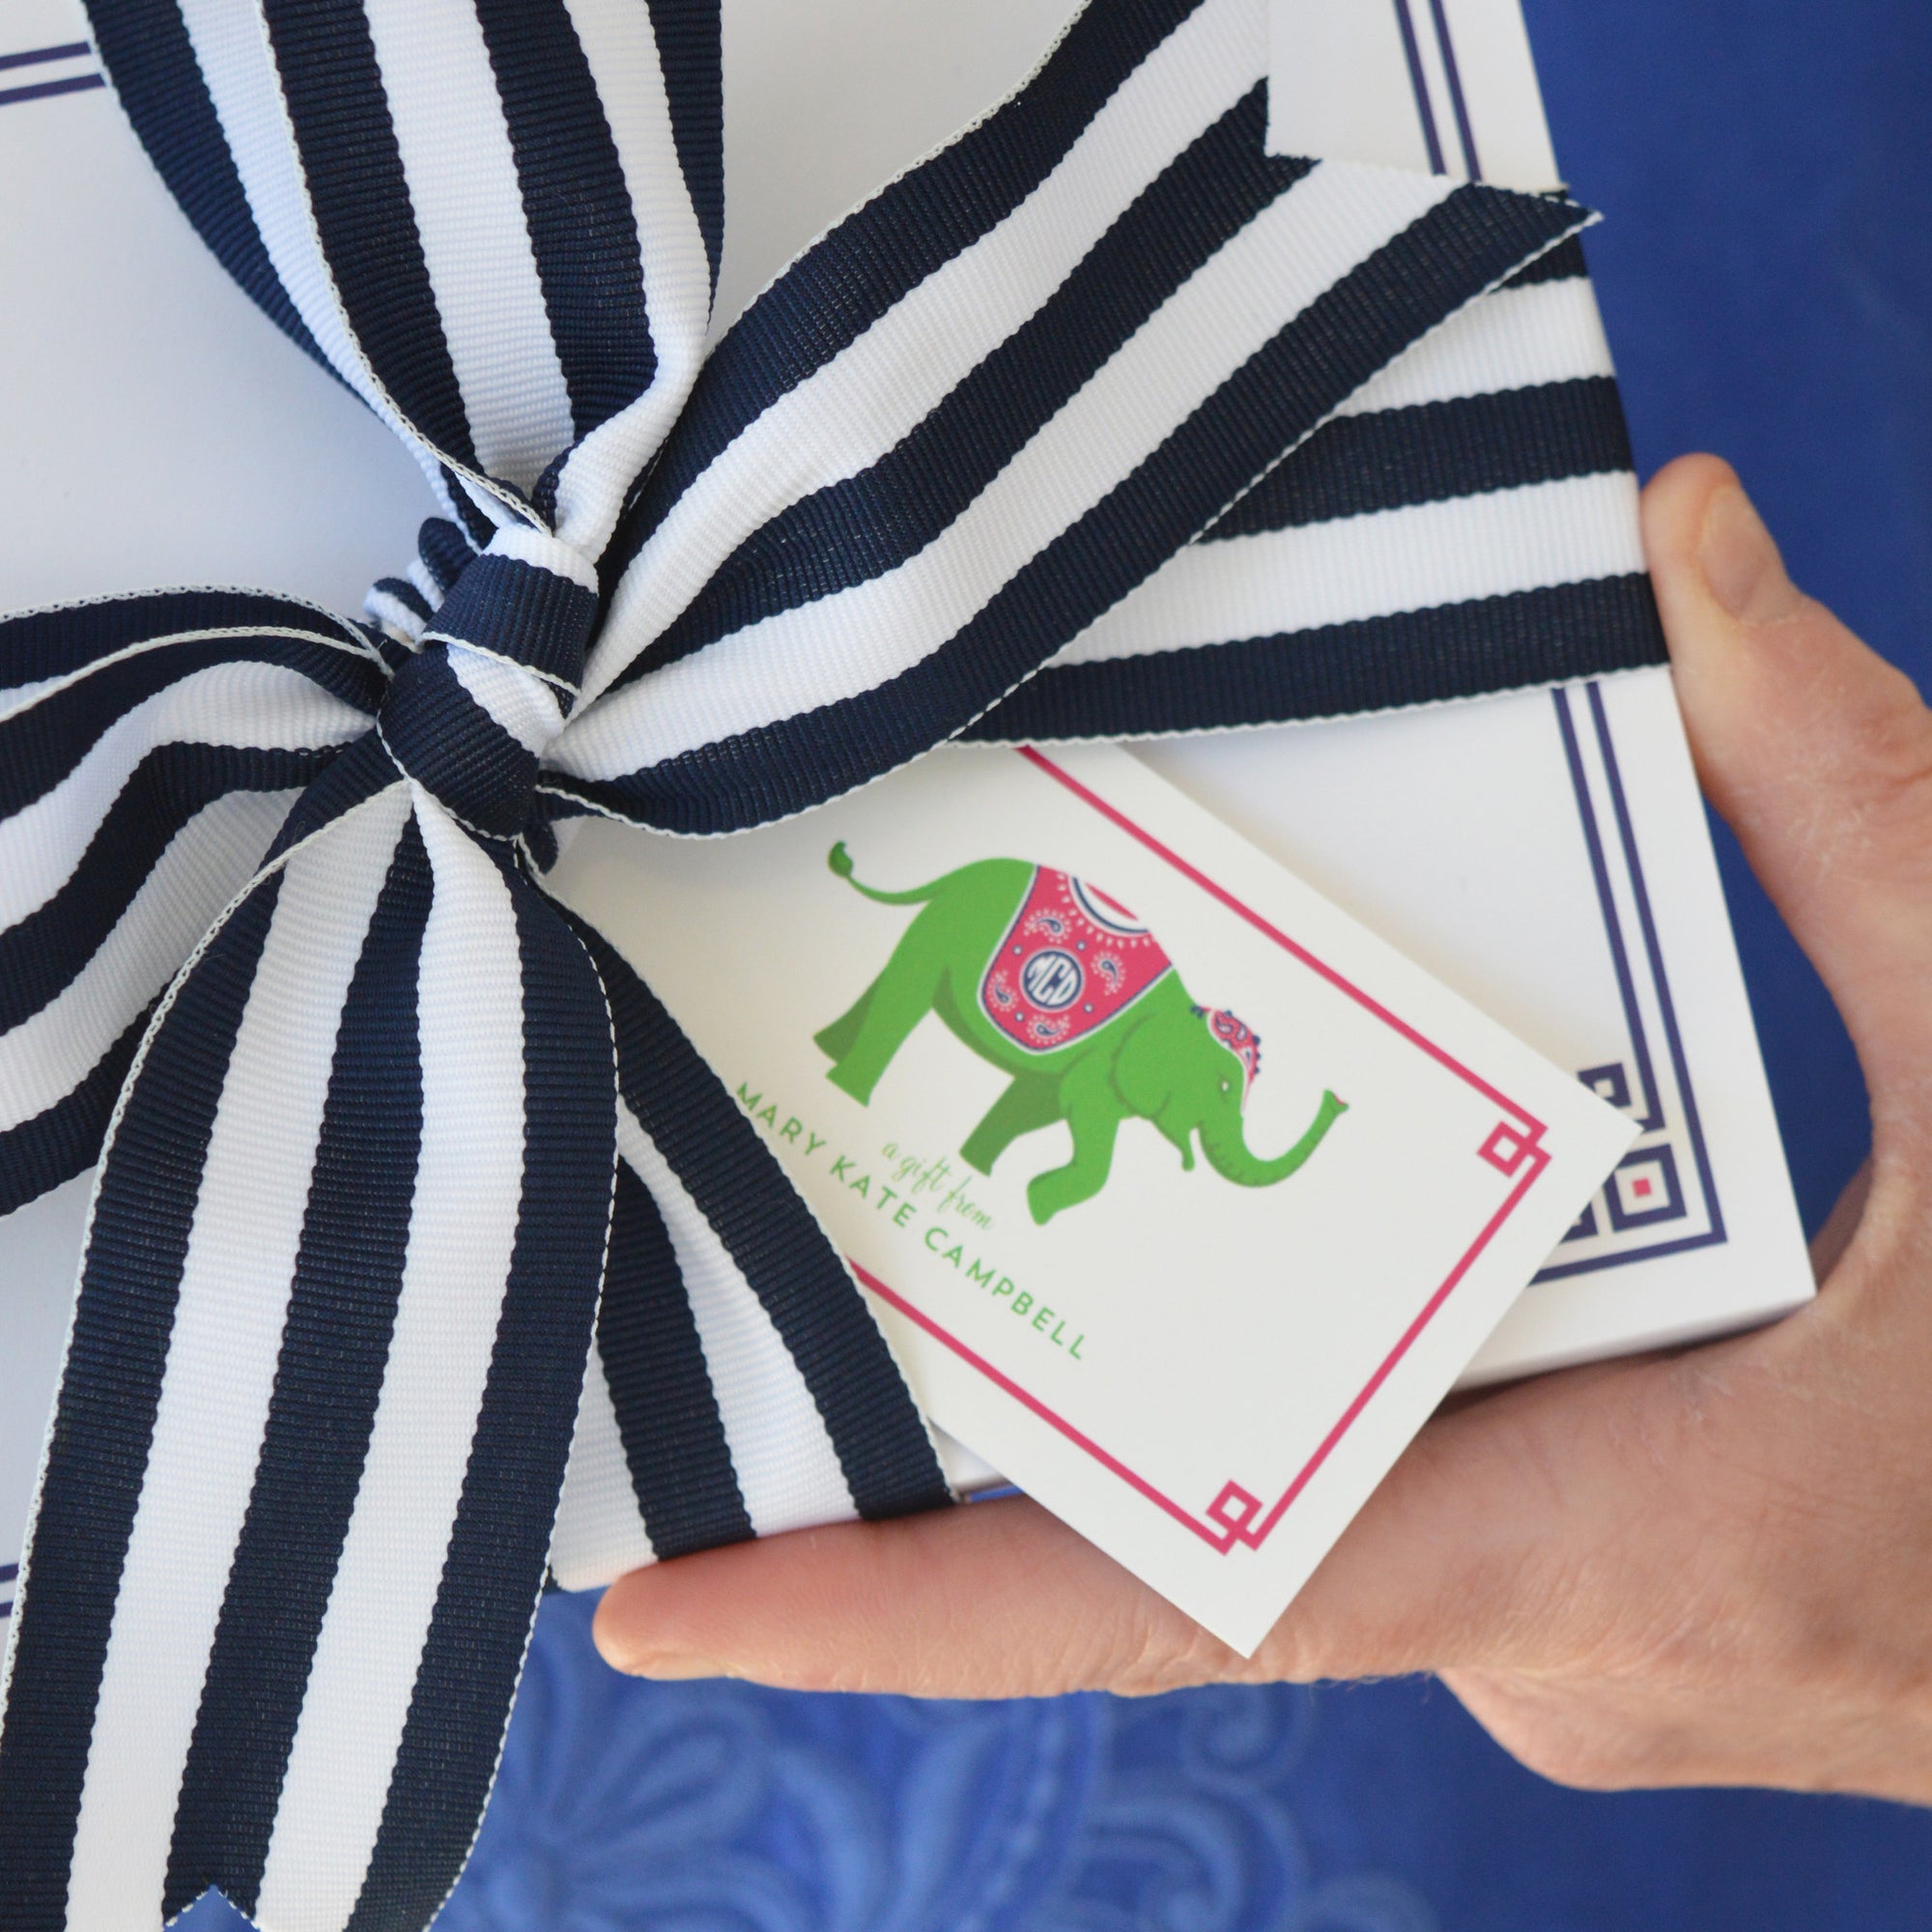 Elephant Personalized Gift Tags | More Colors